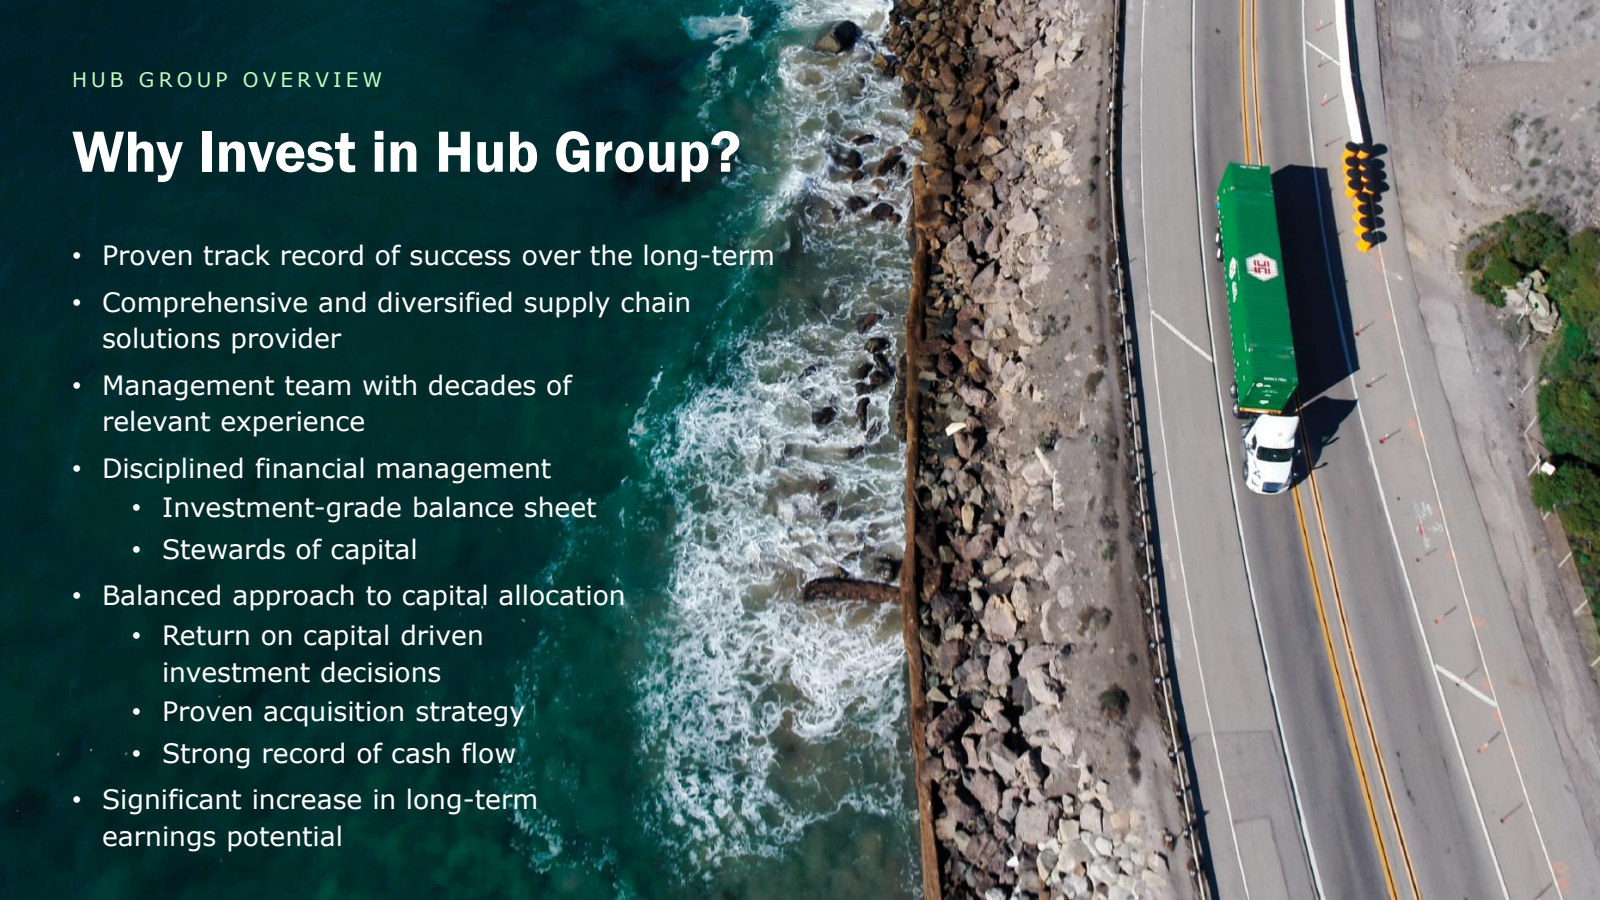 HUB GROUP OVERVIEW 
